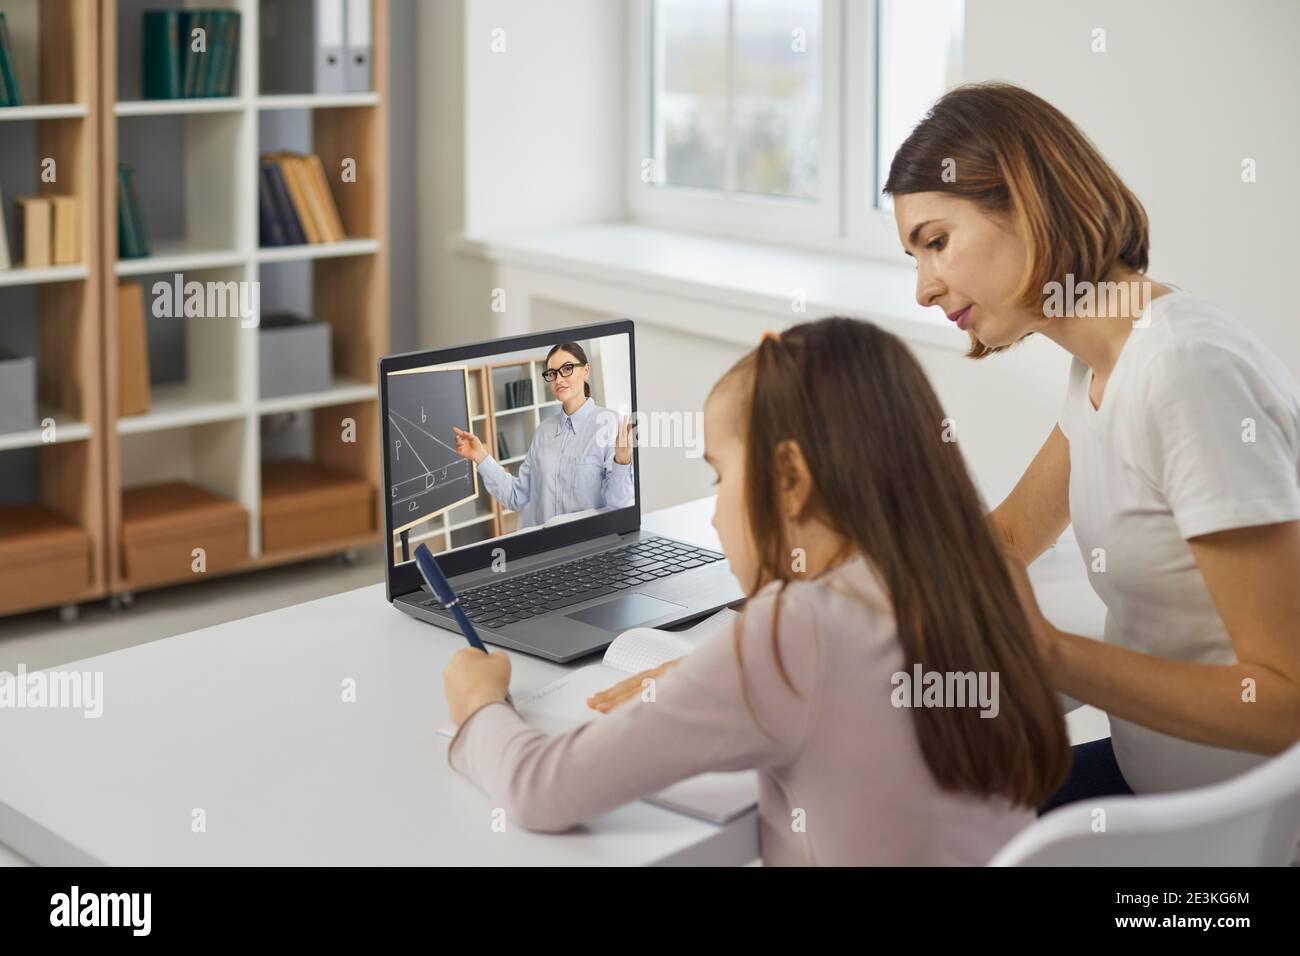 Mom helps her daughter in math by listening to a school teacher in an online lesson via video call. Stock Photo